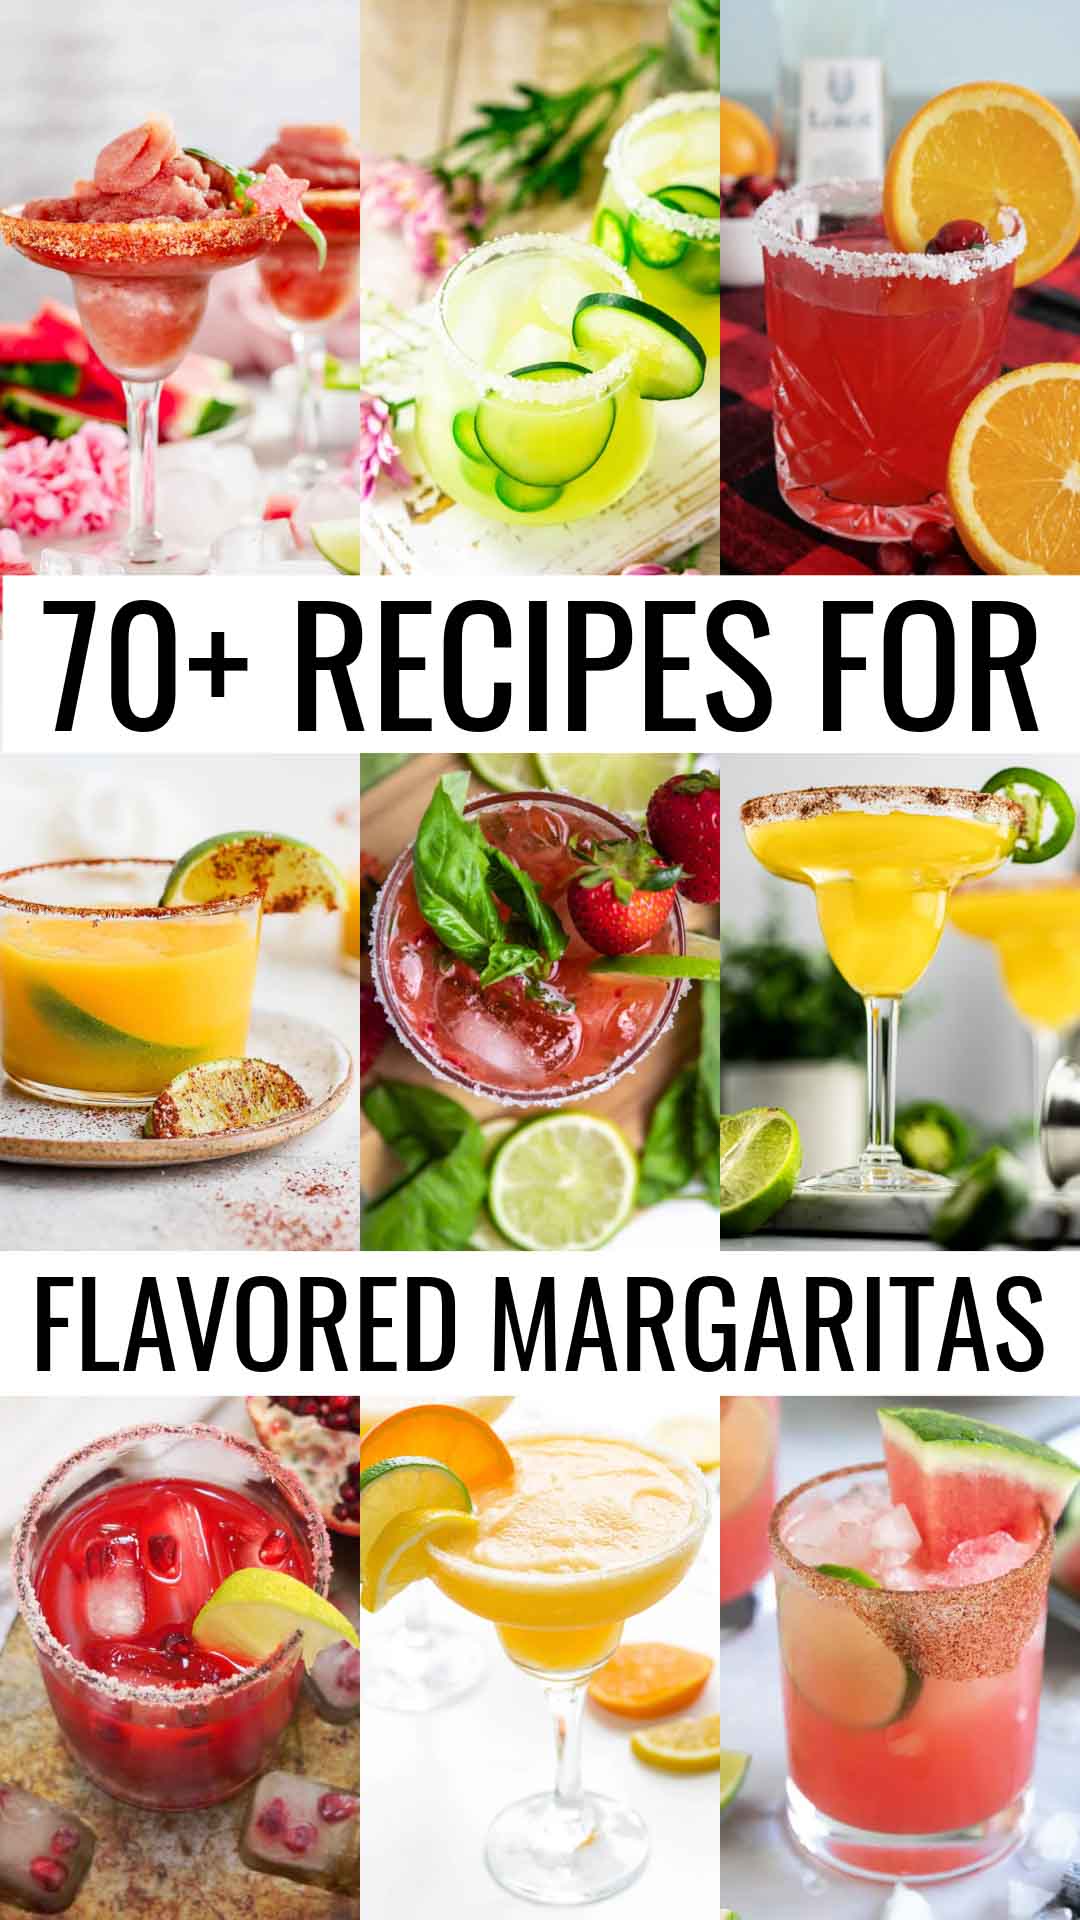 70+ Recipes for Flavored Margaritas